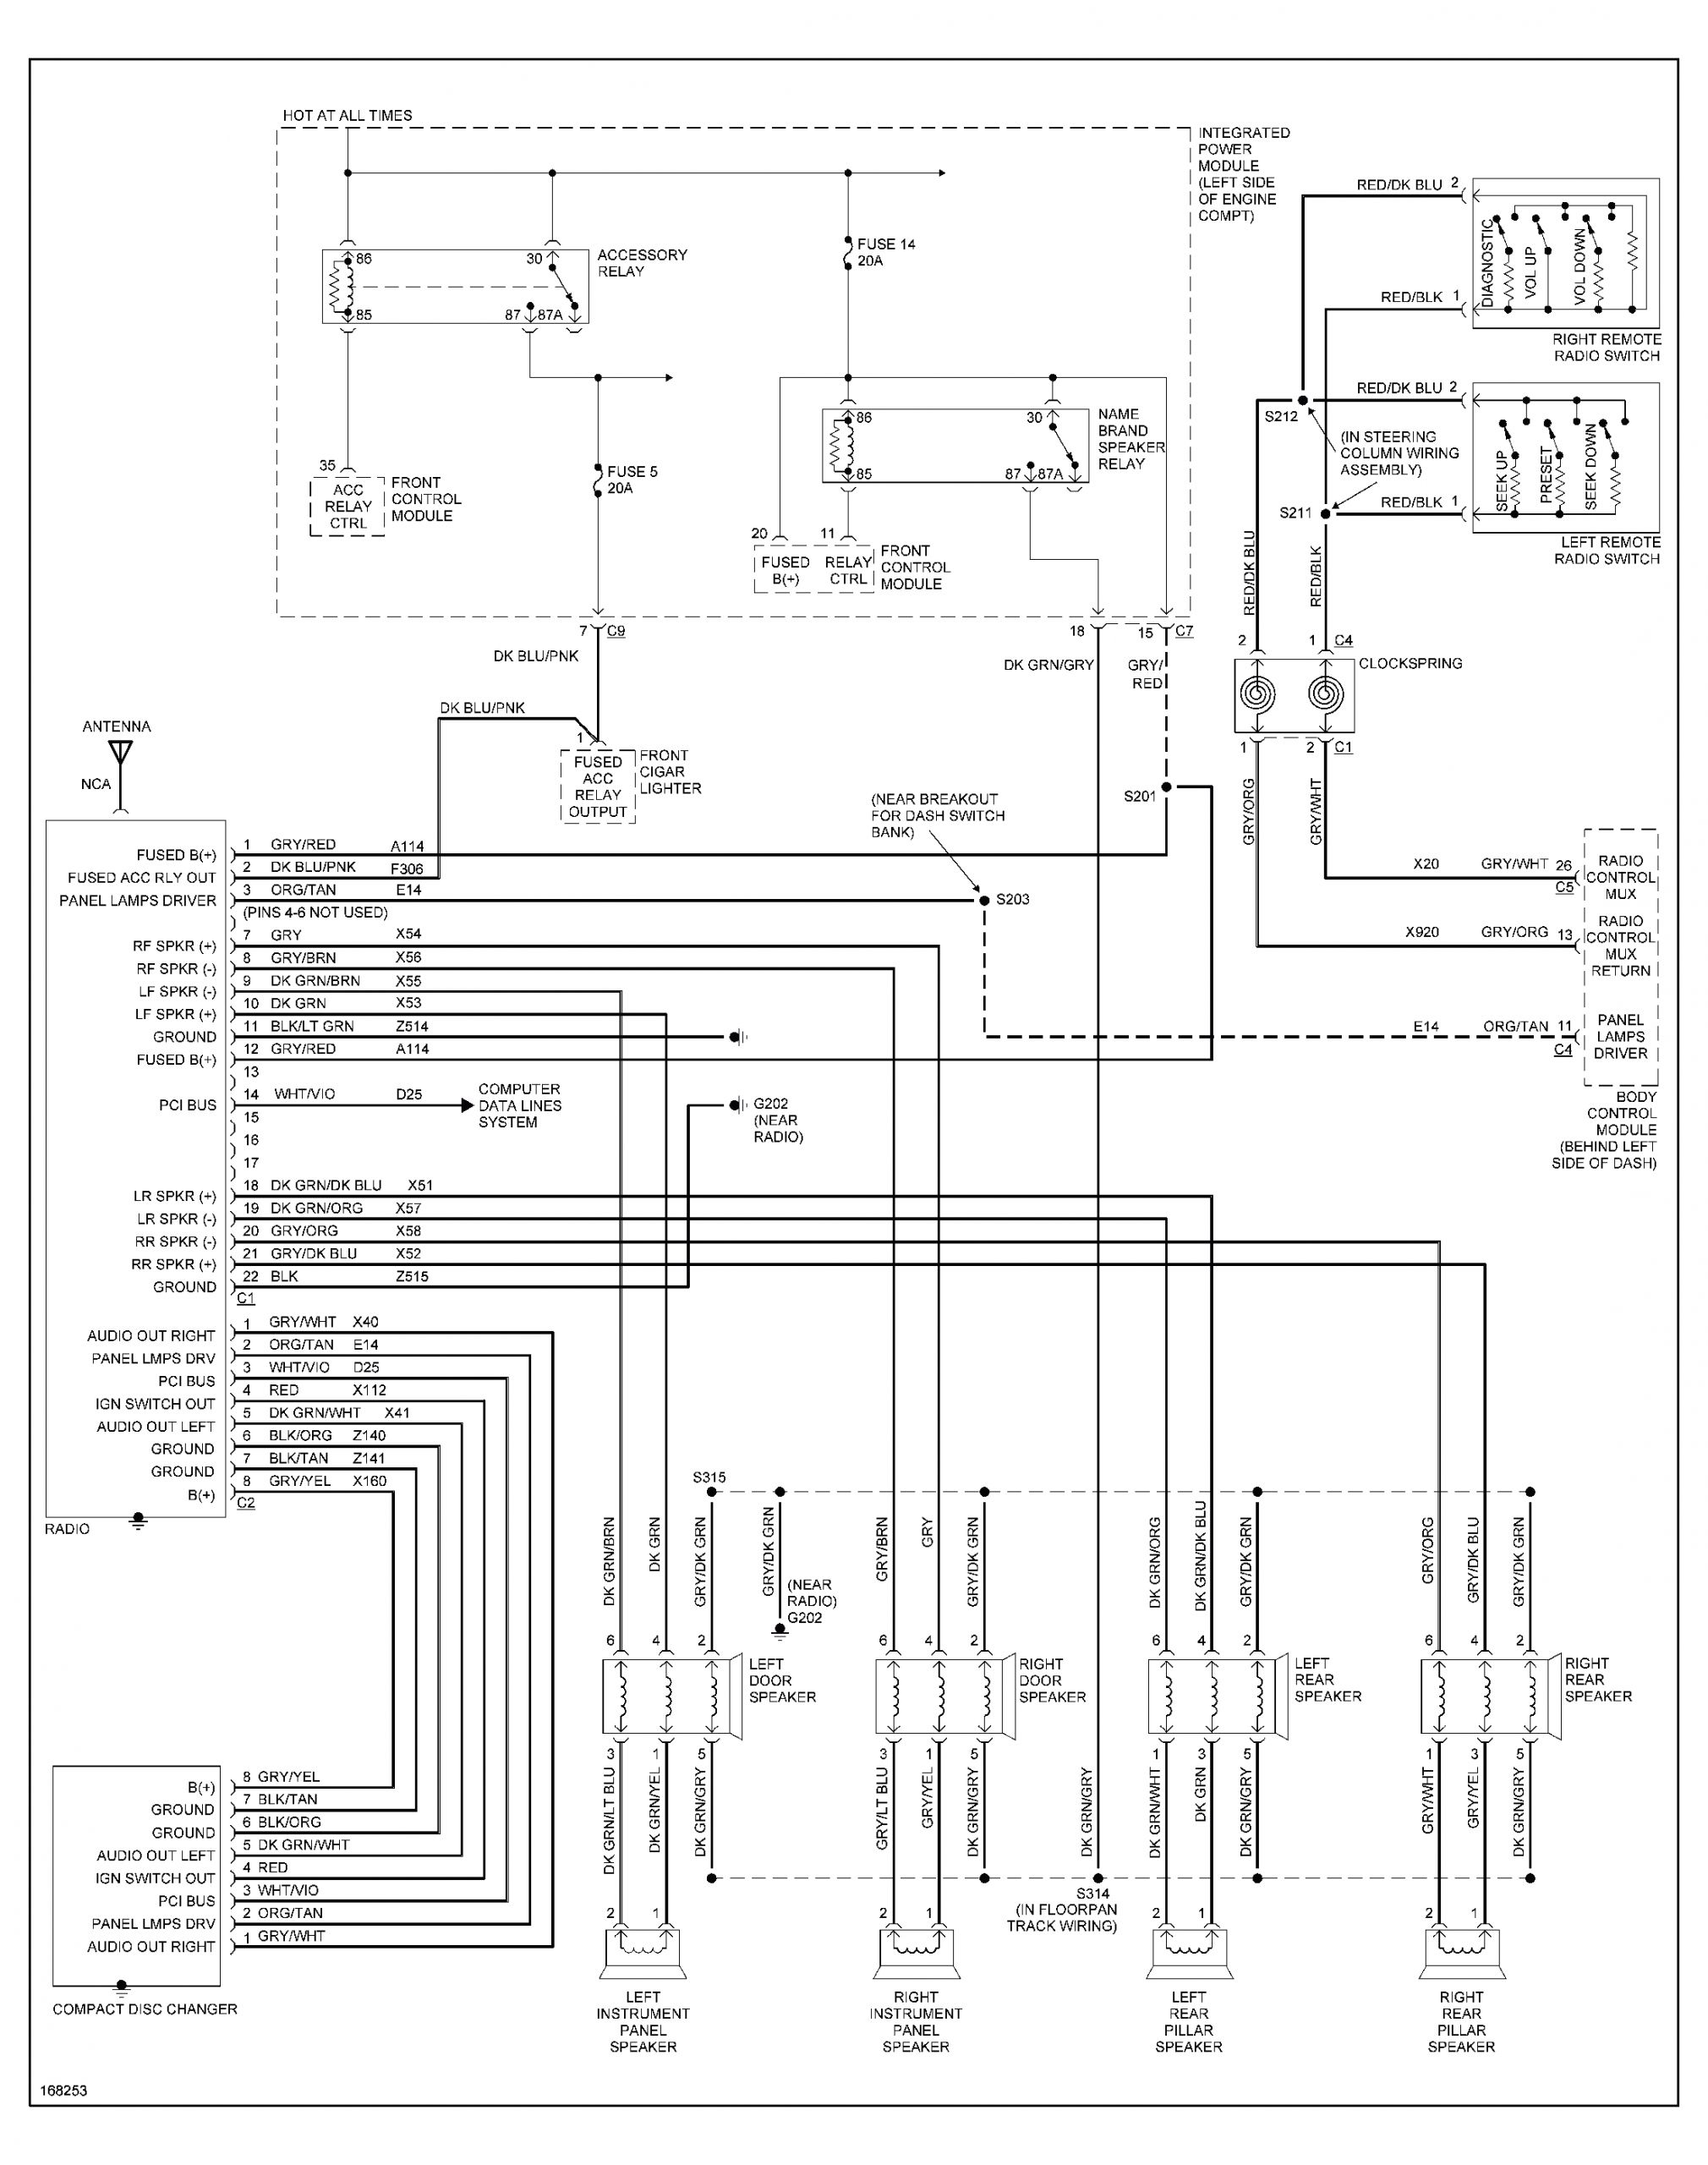 2005 dodge ram 1500 stereo wiring diagram collection